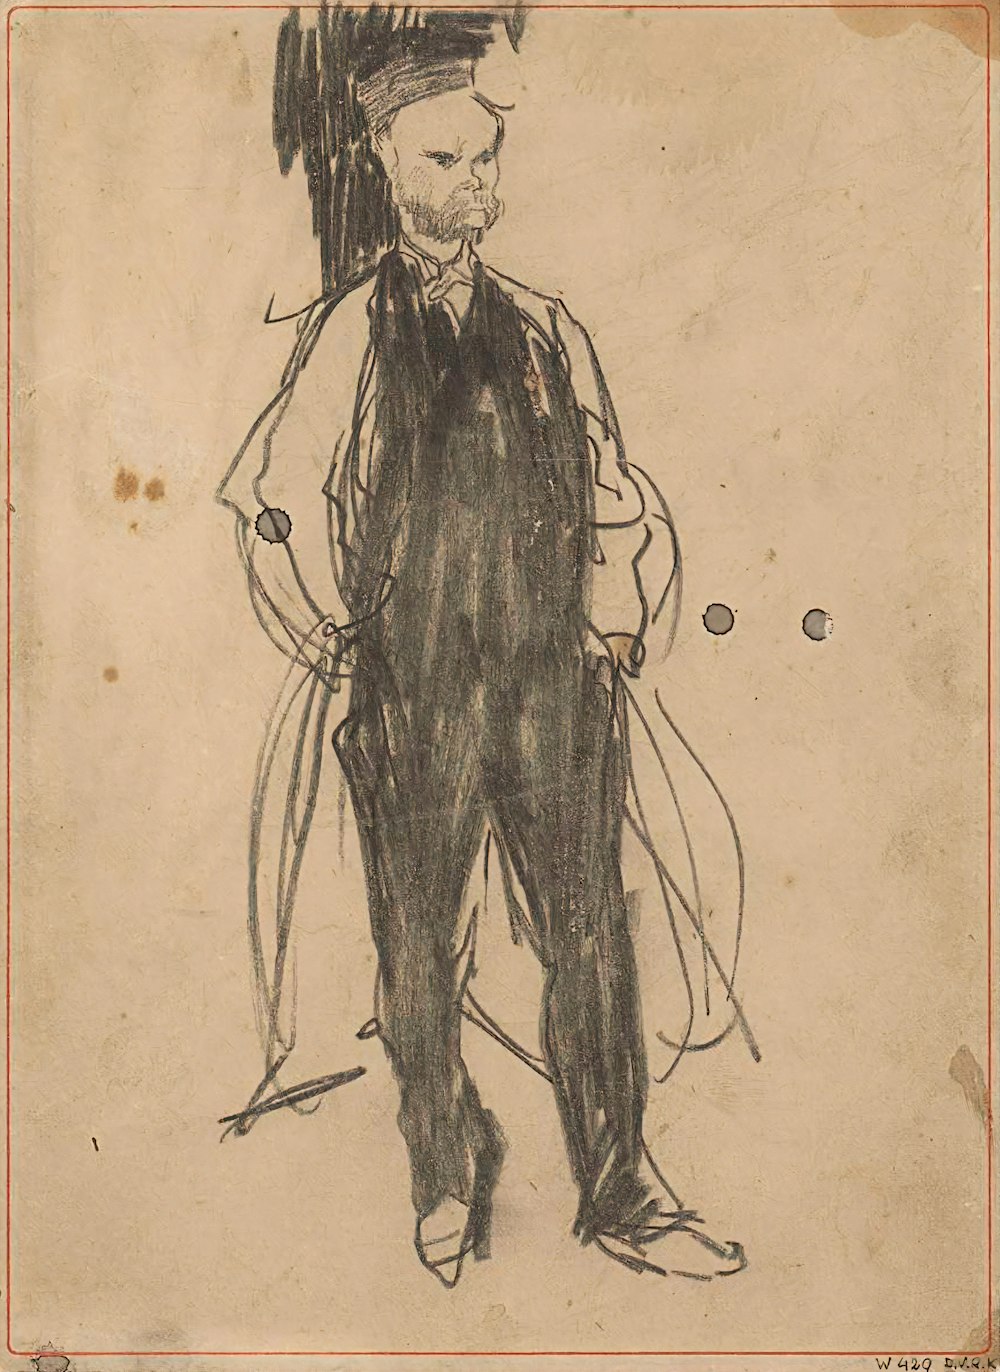 a drawing of a person